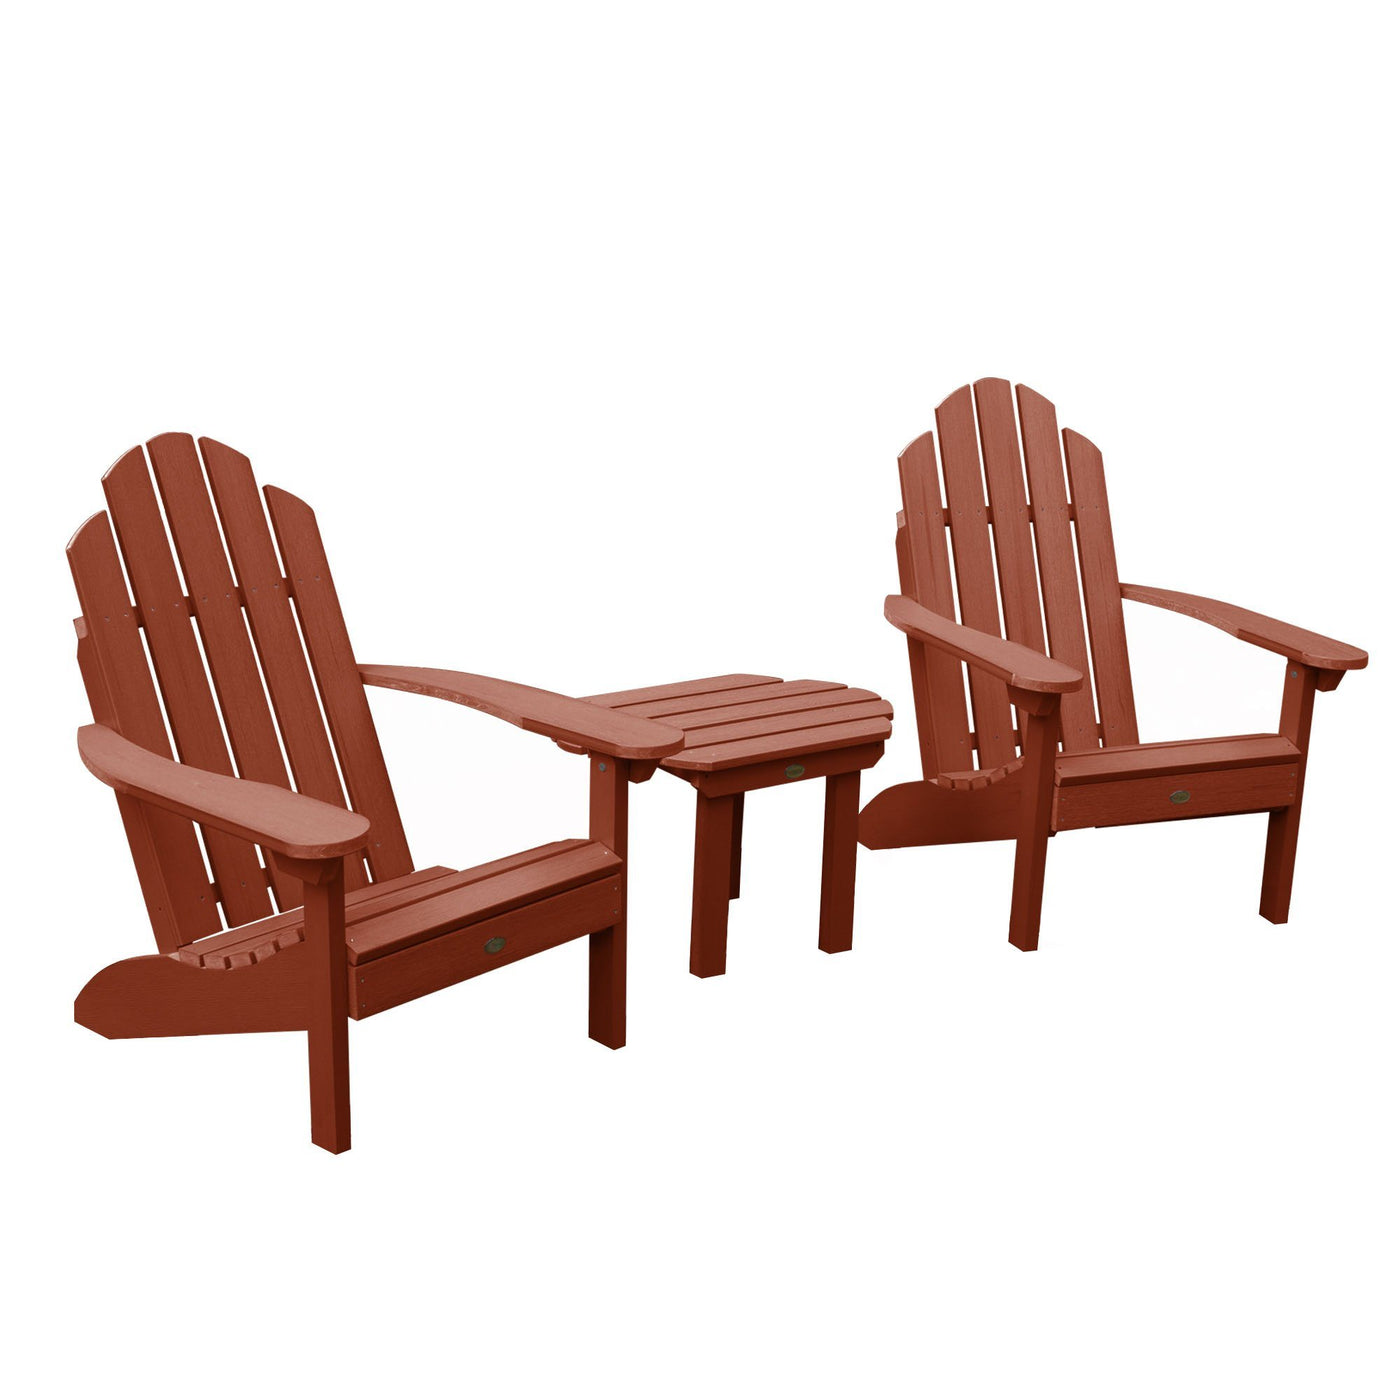 2 Classic Westport Adirondack Chairs with 1 Westport Side Table Highwood USA Rustic Red 